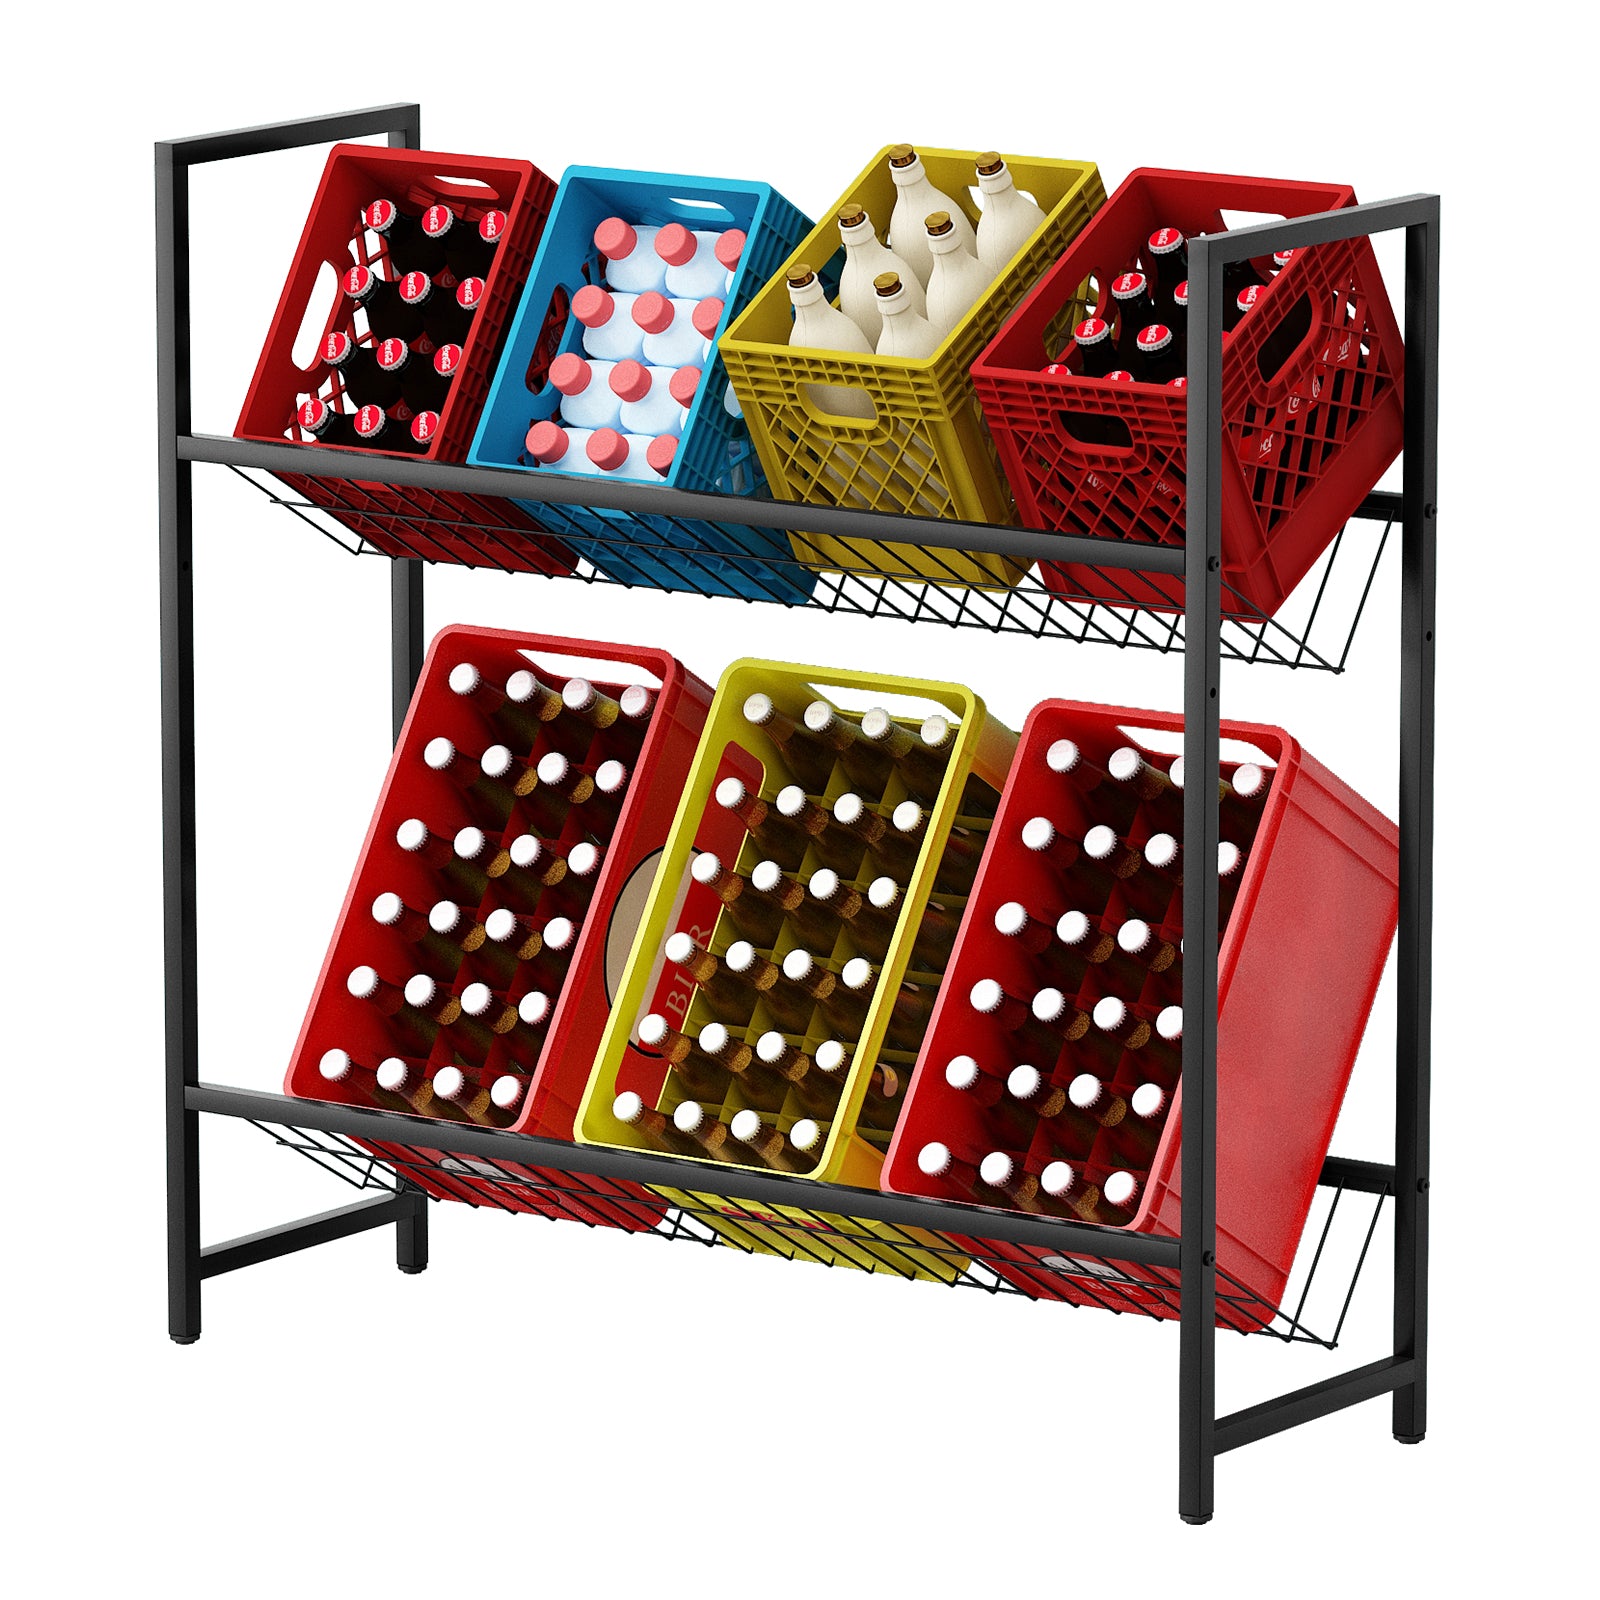 Beverage-Shelf-with-Wire-Mesh-Support-Height-Adjustable-Beverage-Crate-Holder-for-6-8-Crates-Beverage-Crate-Shelf-with-Adjustable-Feet-Beverage-Shelf